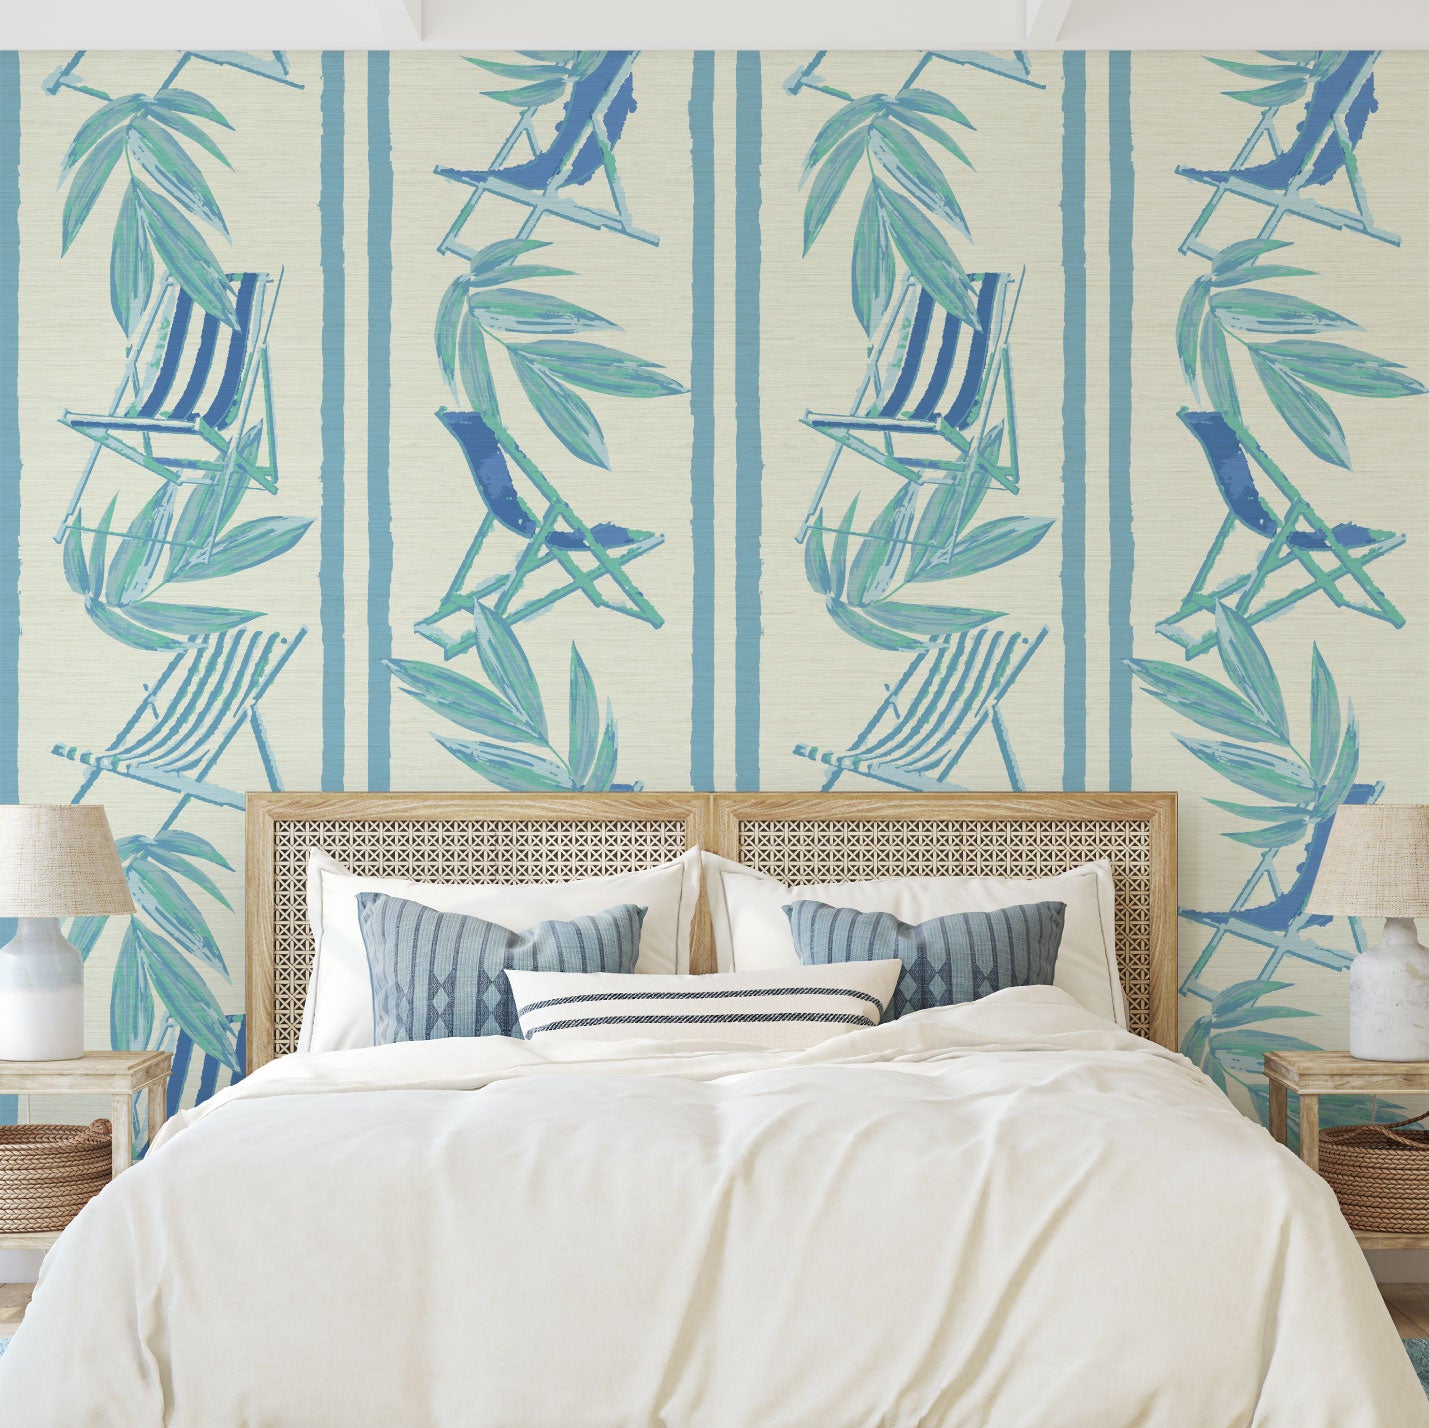 vertical linear grasscloth wallpaper print with a beachy design of blue leaves and stripes paired with shades of blue beach chairs arranged in a vertical oversized stripe Grasscloth Natural Textured Eco-Friendly Non-toxic High-quality Sustainable practices Sustainability Interior Design Wall covering bold Seaside Coastal Seashore Waterfront Vacation home styling Retreat Relaxed beach vibes Beach cottage Shoreline Oceanfront Nautical bedroom